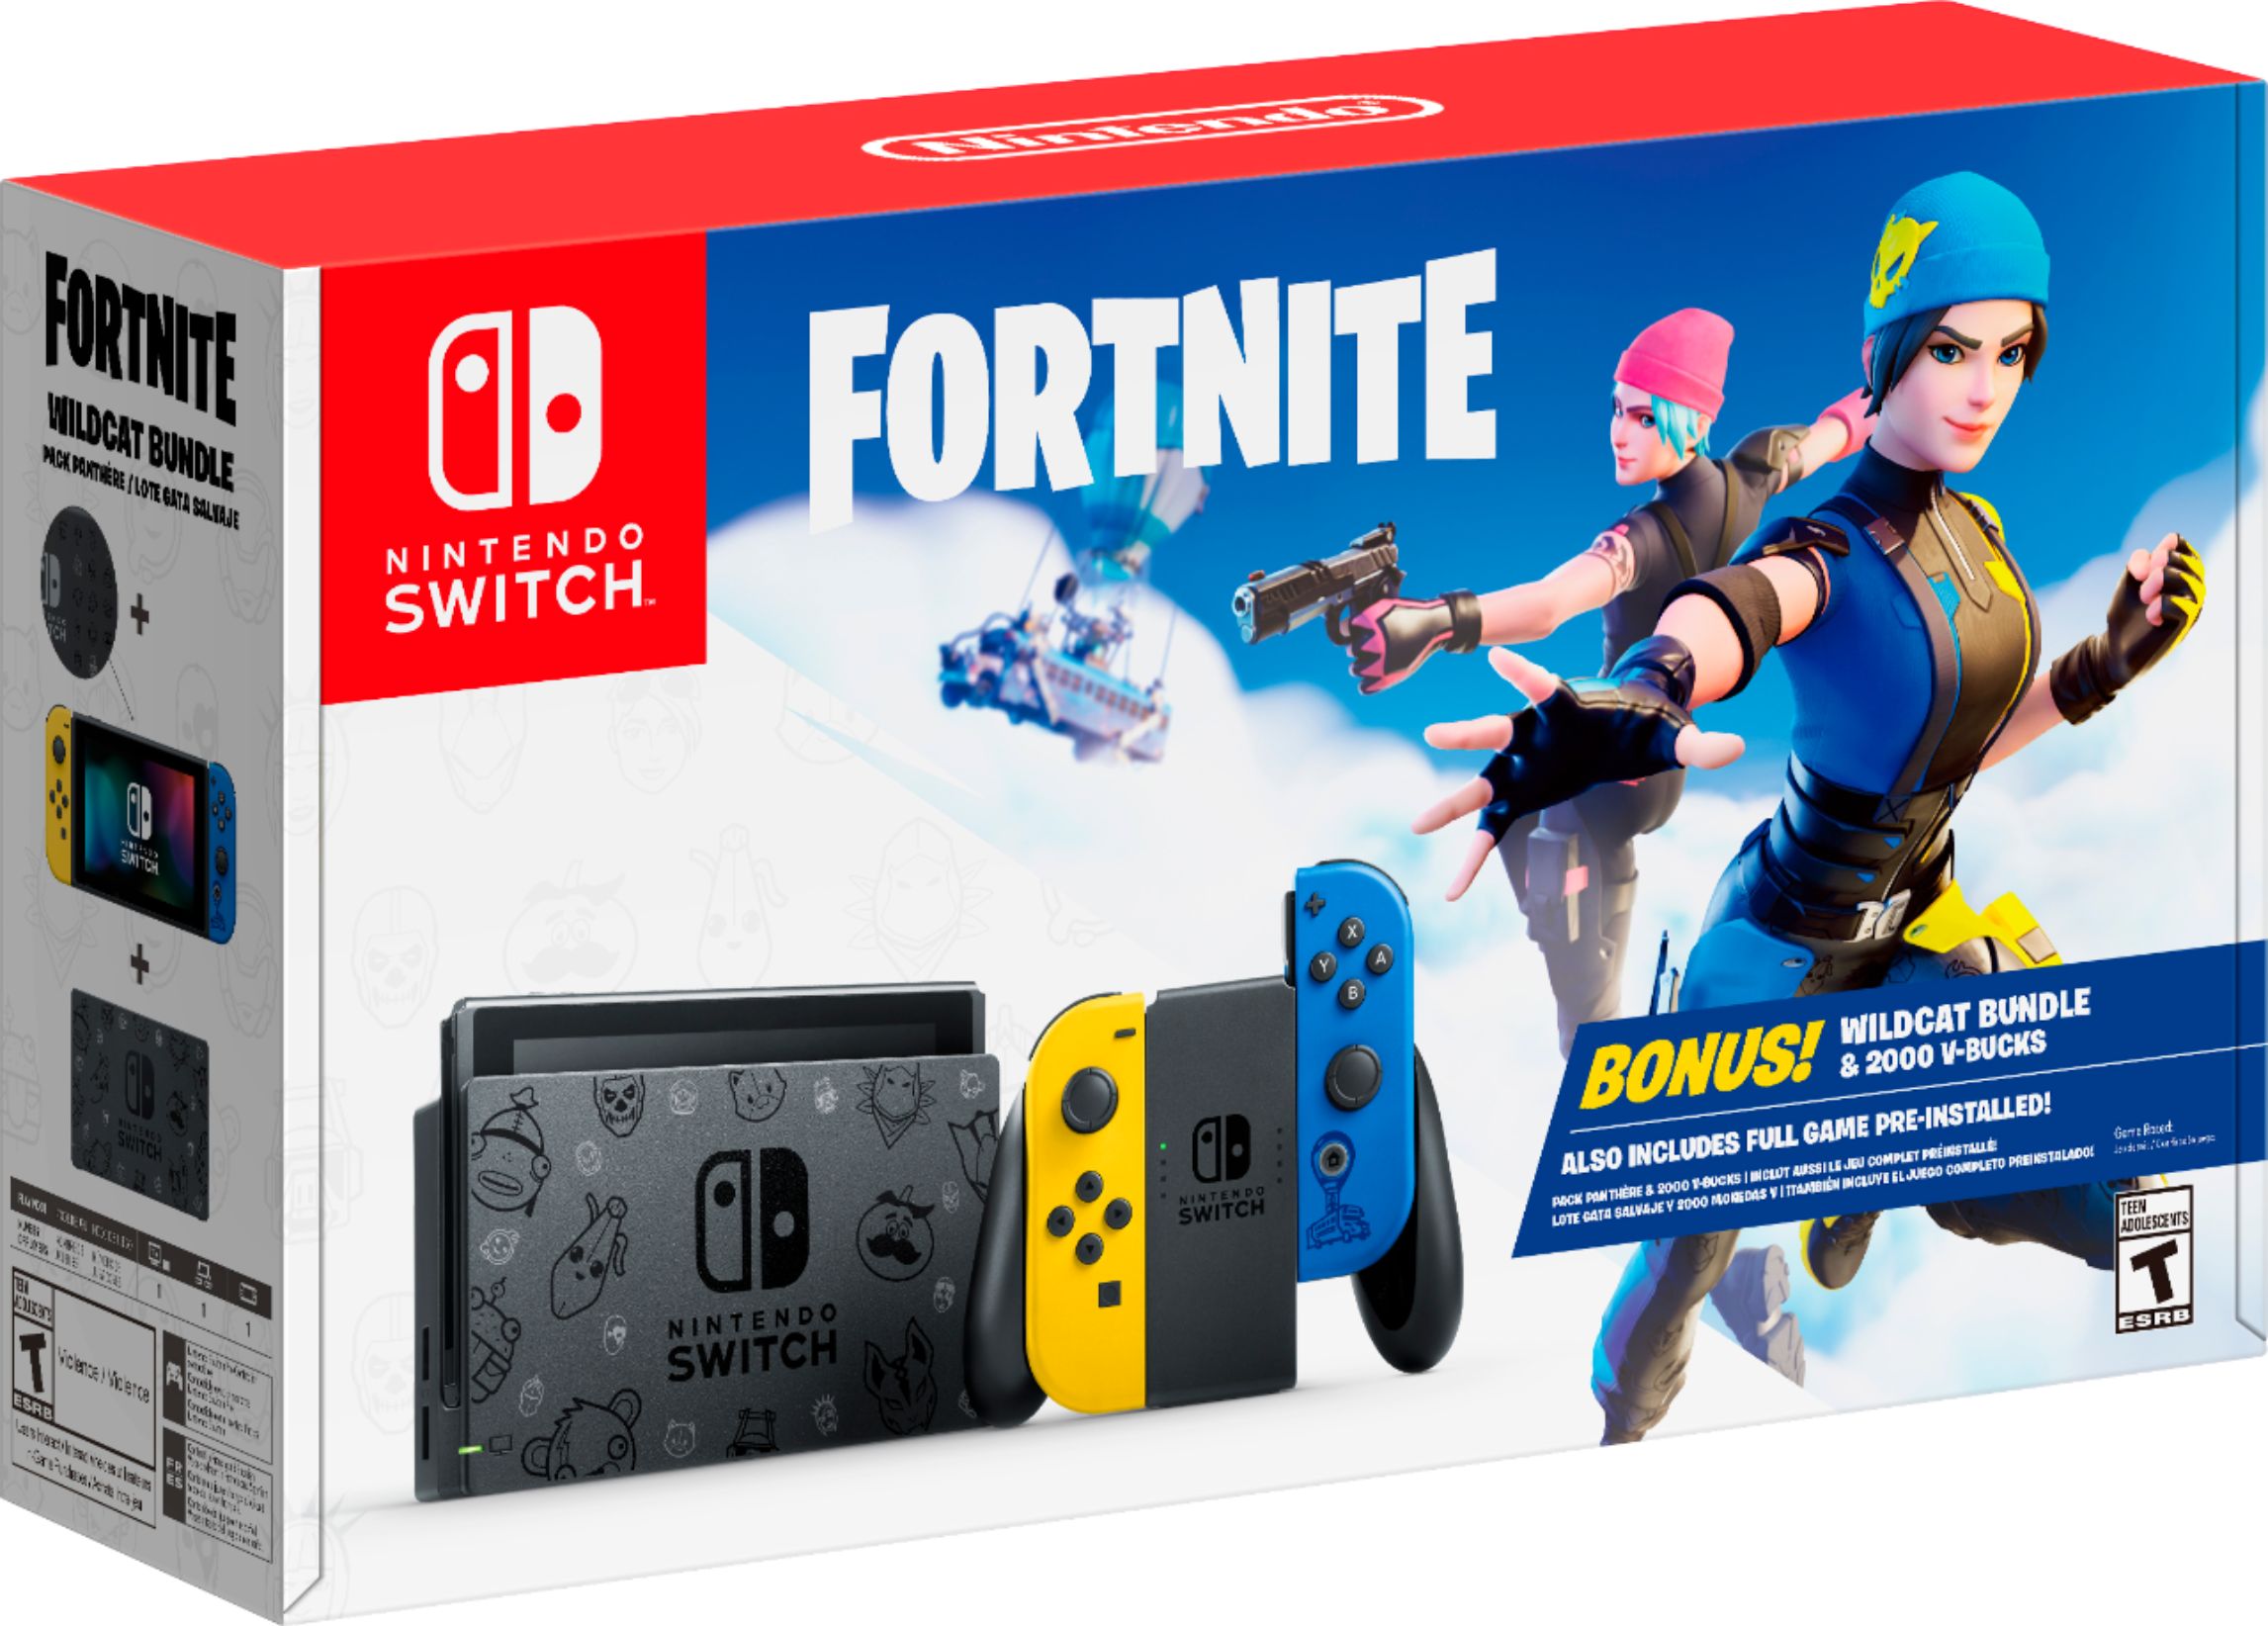 Image for Cyber Monday Nintendo Switch Fortnite bundle goes live